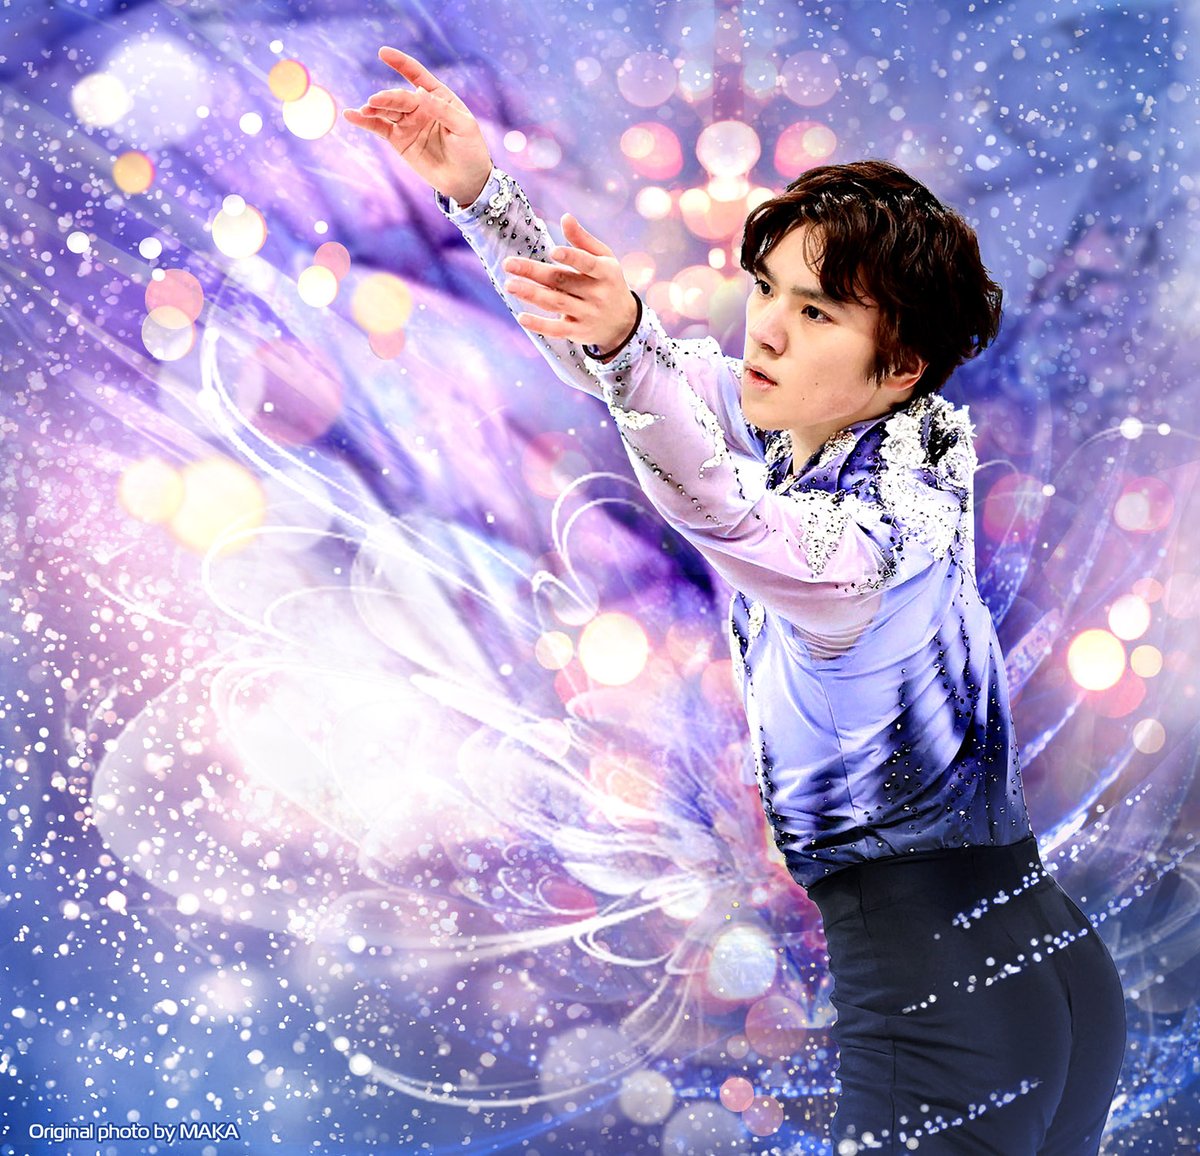 I love you is one of Shoma’s most beautiful programs. Adult, meaningful, graceful skating enchants and remains in the heart. ❤️✨

#宇野昌磨 #ShomaUno
#GoodLuckShoma